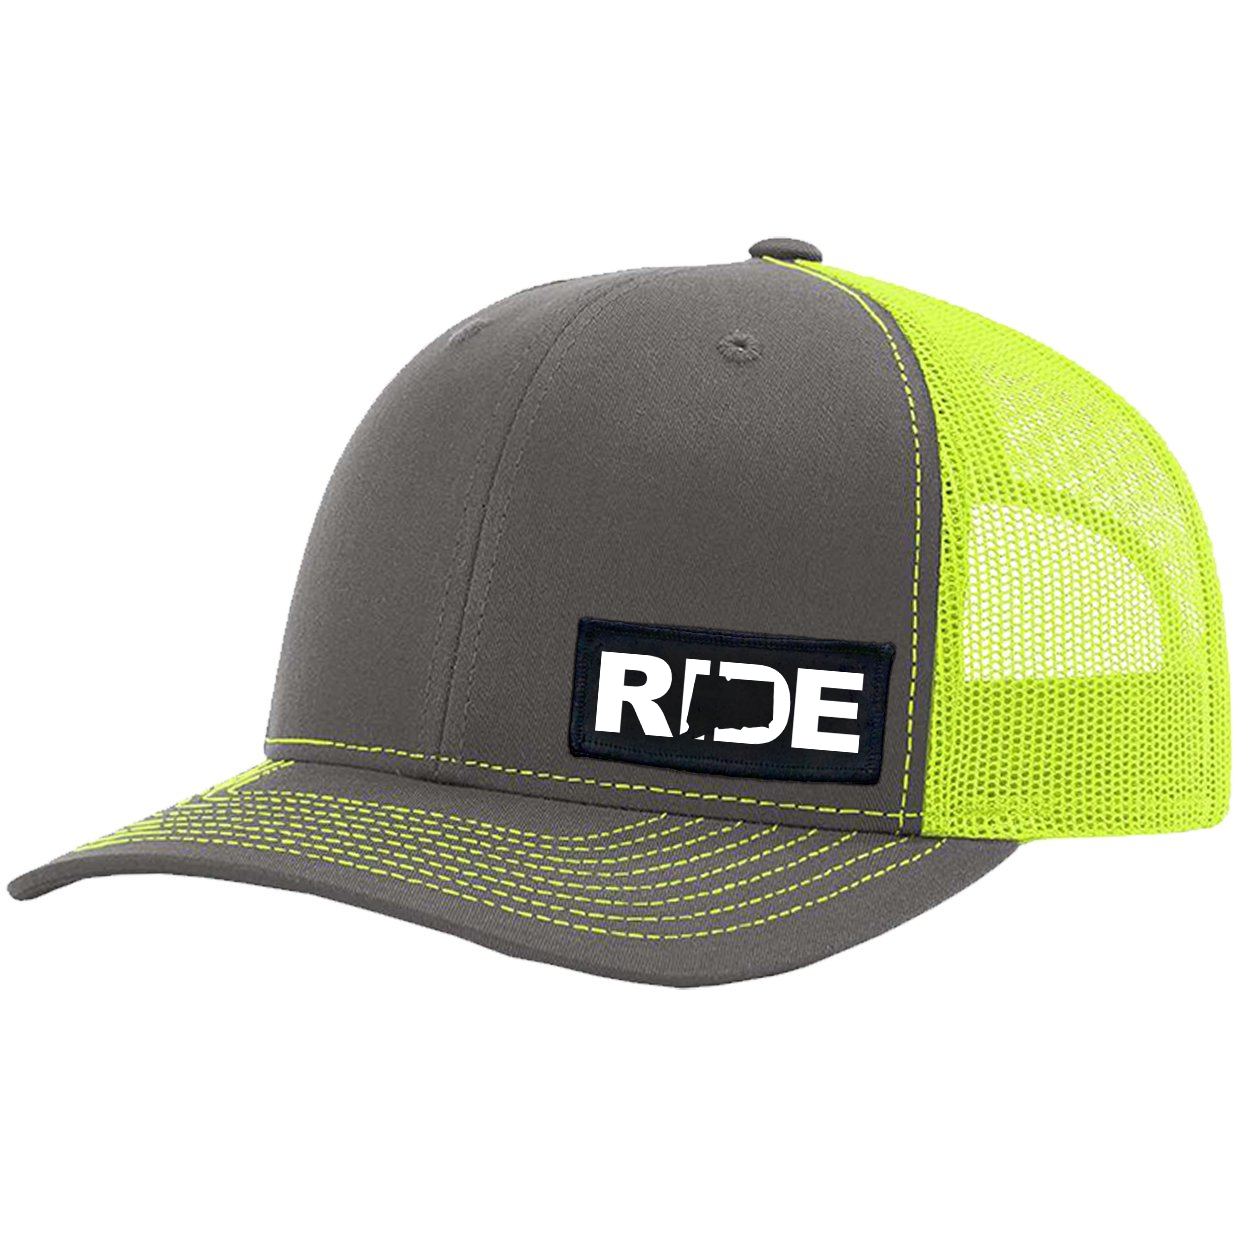 Ride Connecticut Night Out Woven Patch Snapback Trucker Hat Charcoal/Neon Yellow (White Logo)